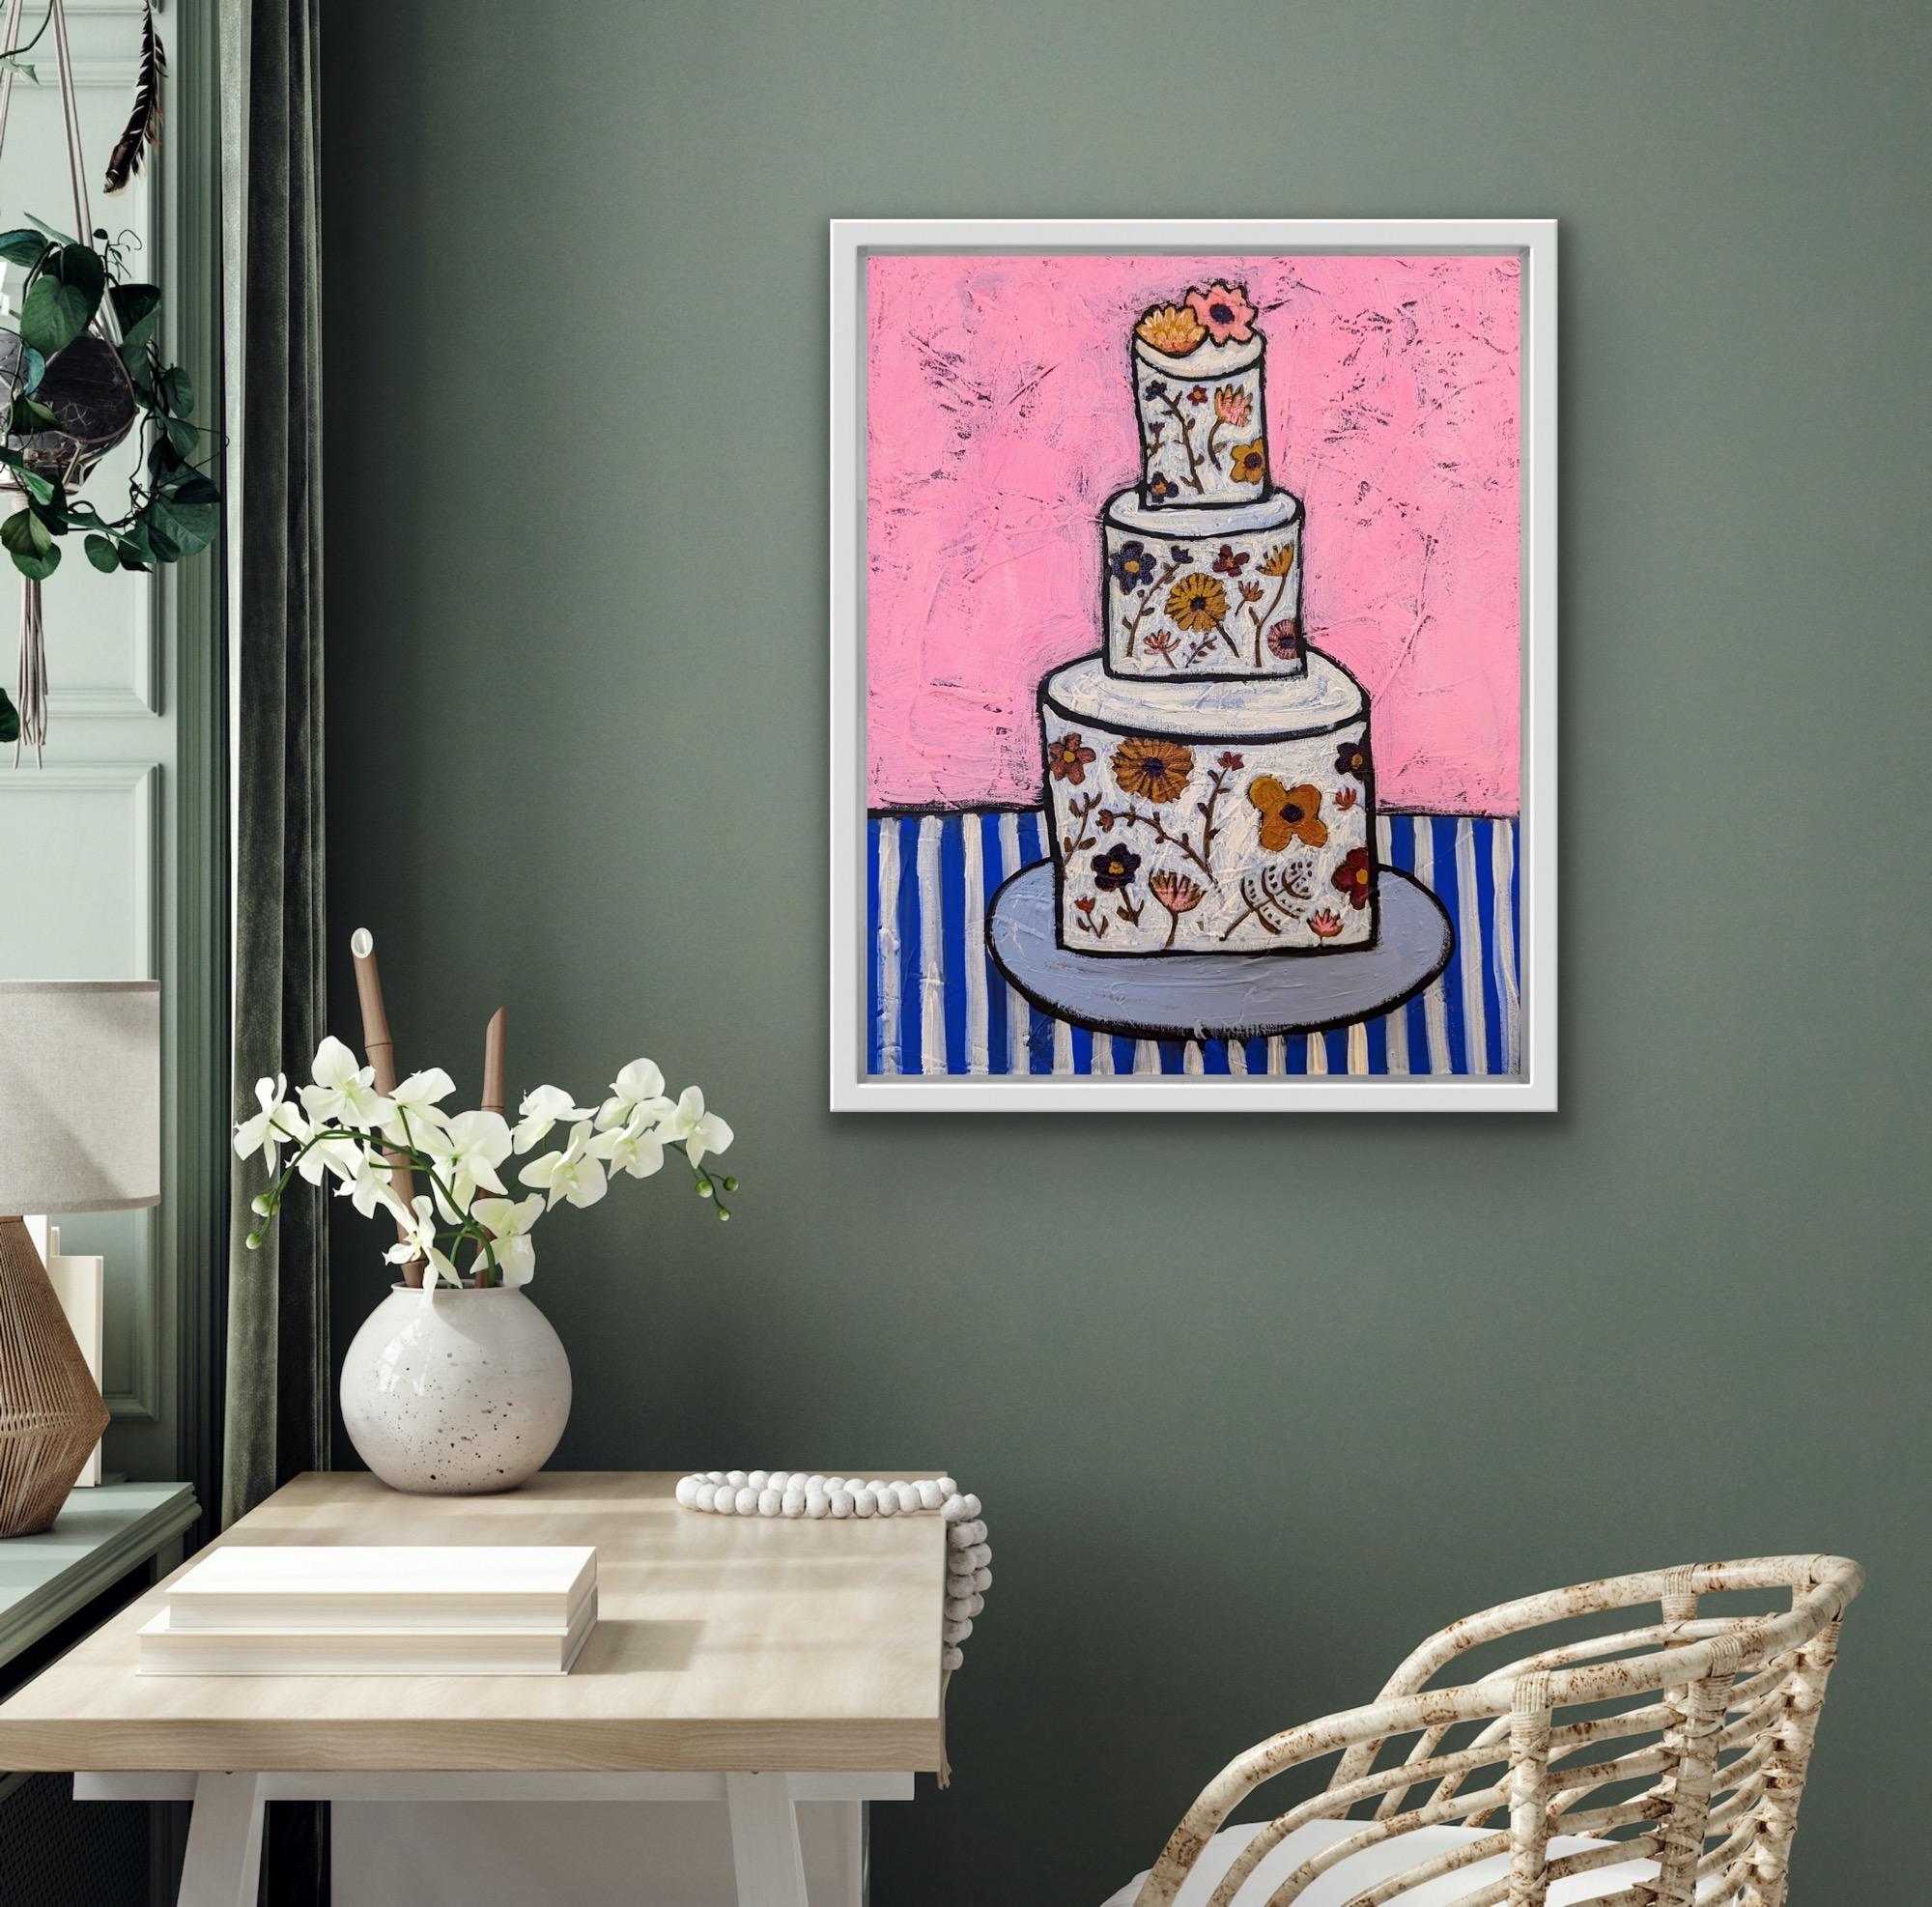 Incredible Edible Flower Cake, Bright Still Life Food Art, Contemporary Pop Art - Purple Interior Painting by Kerry Louise Bennett